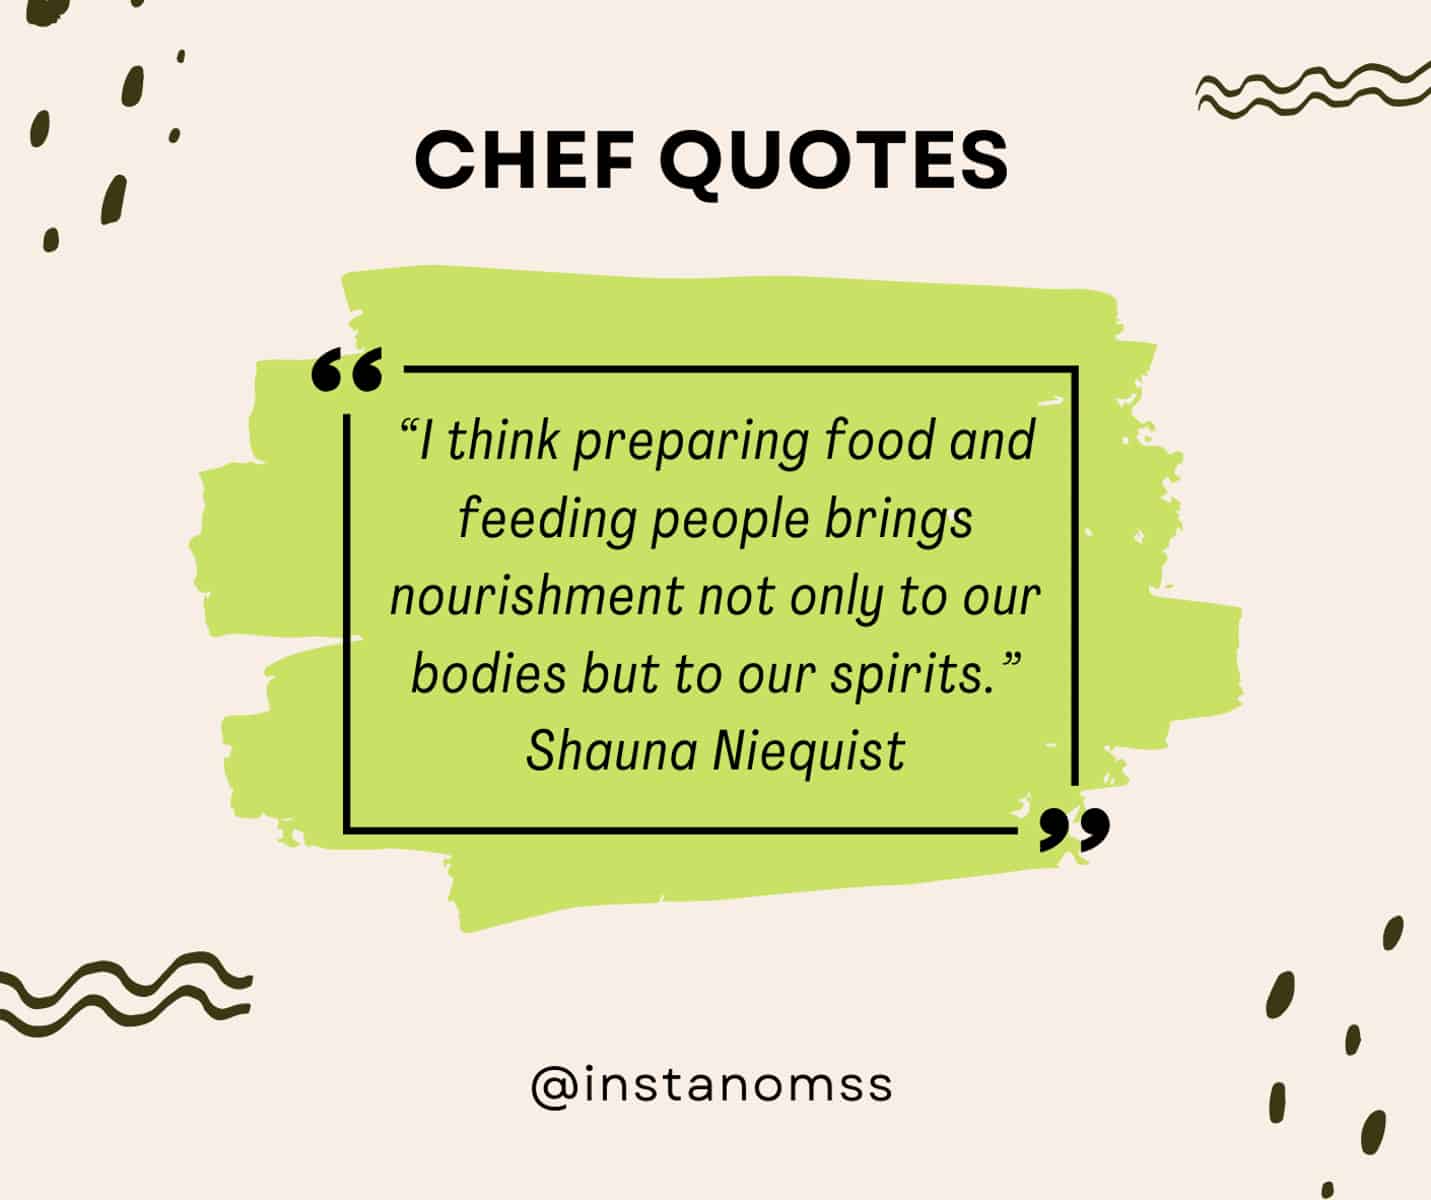 “I think preparing food and feeding people brings nourishment not only to our bodies but to our spirits.” Shauna Niequist